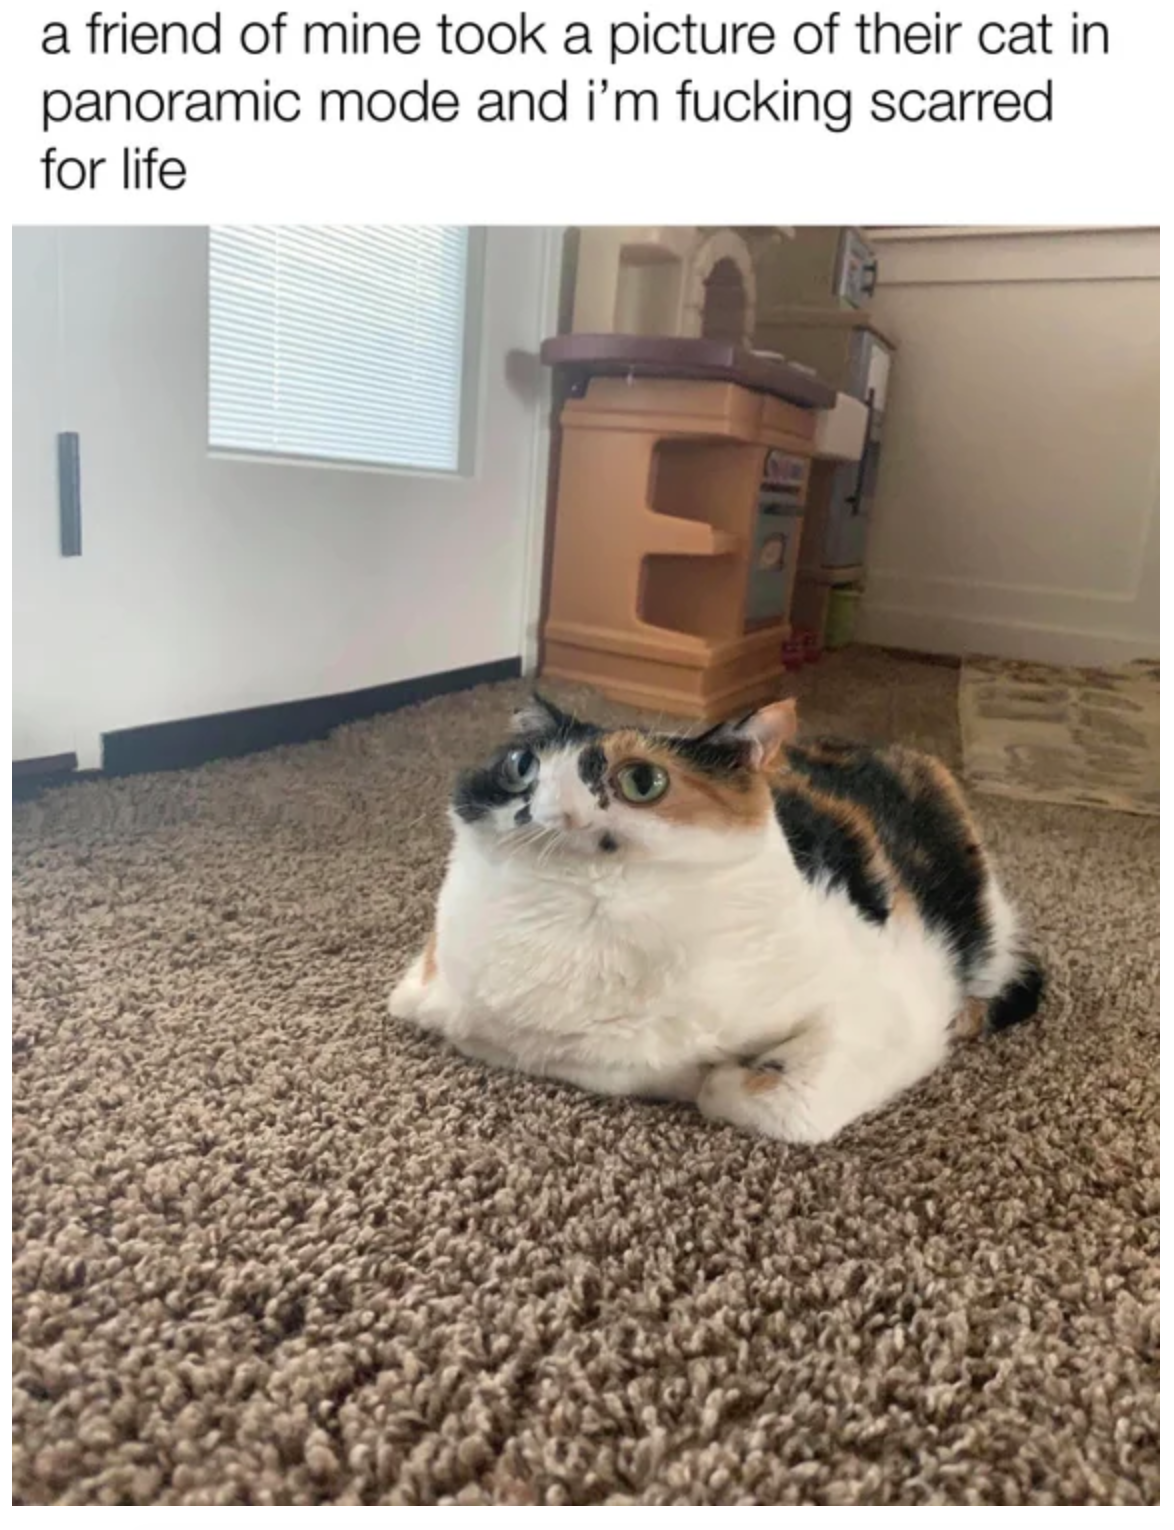 photo caption - a friend of mine took a picture of their cat in panoramic mode and i'm fucking scarred for life